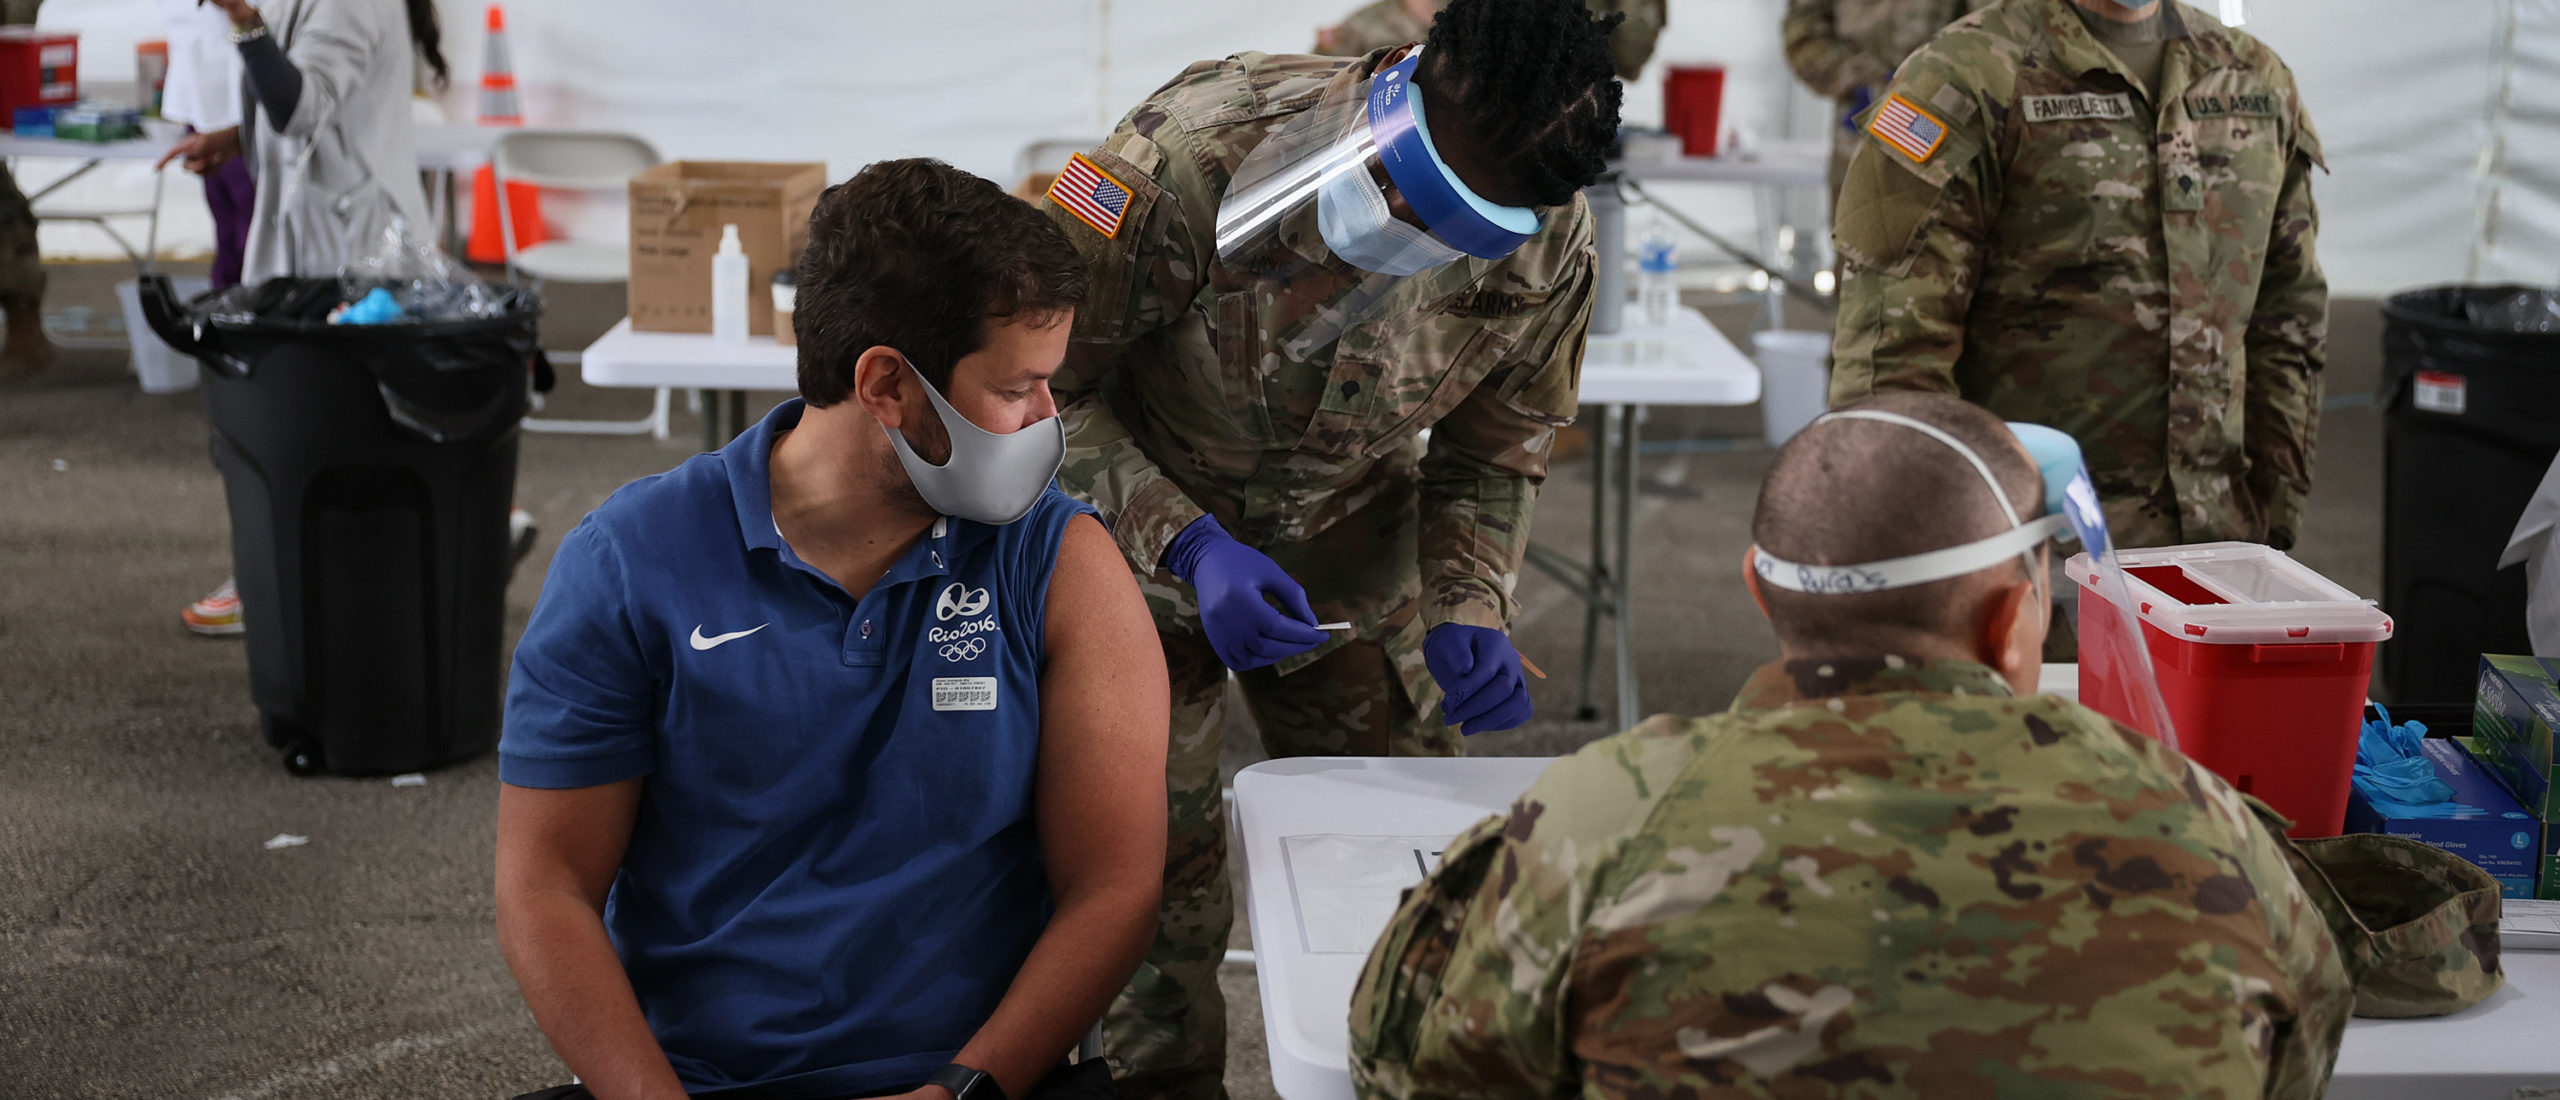 Army Might Boot 60,000 Unvaccinated Soldiers Amid Recruiting Crisis